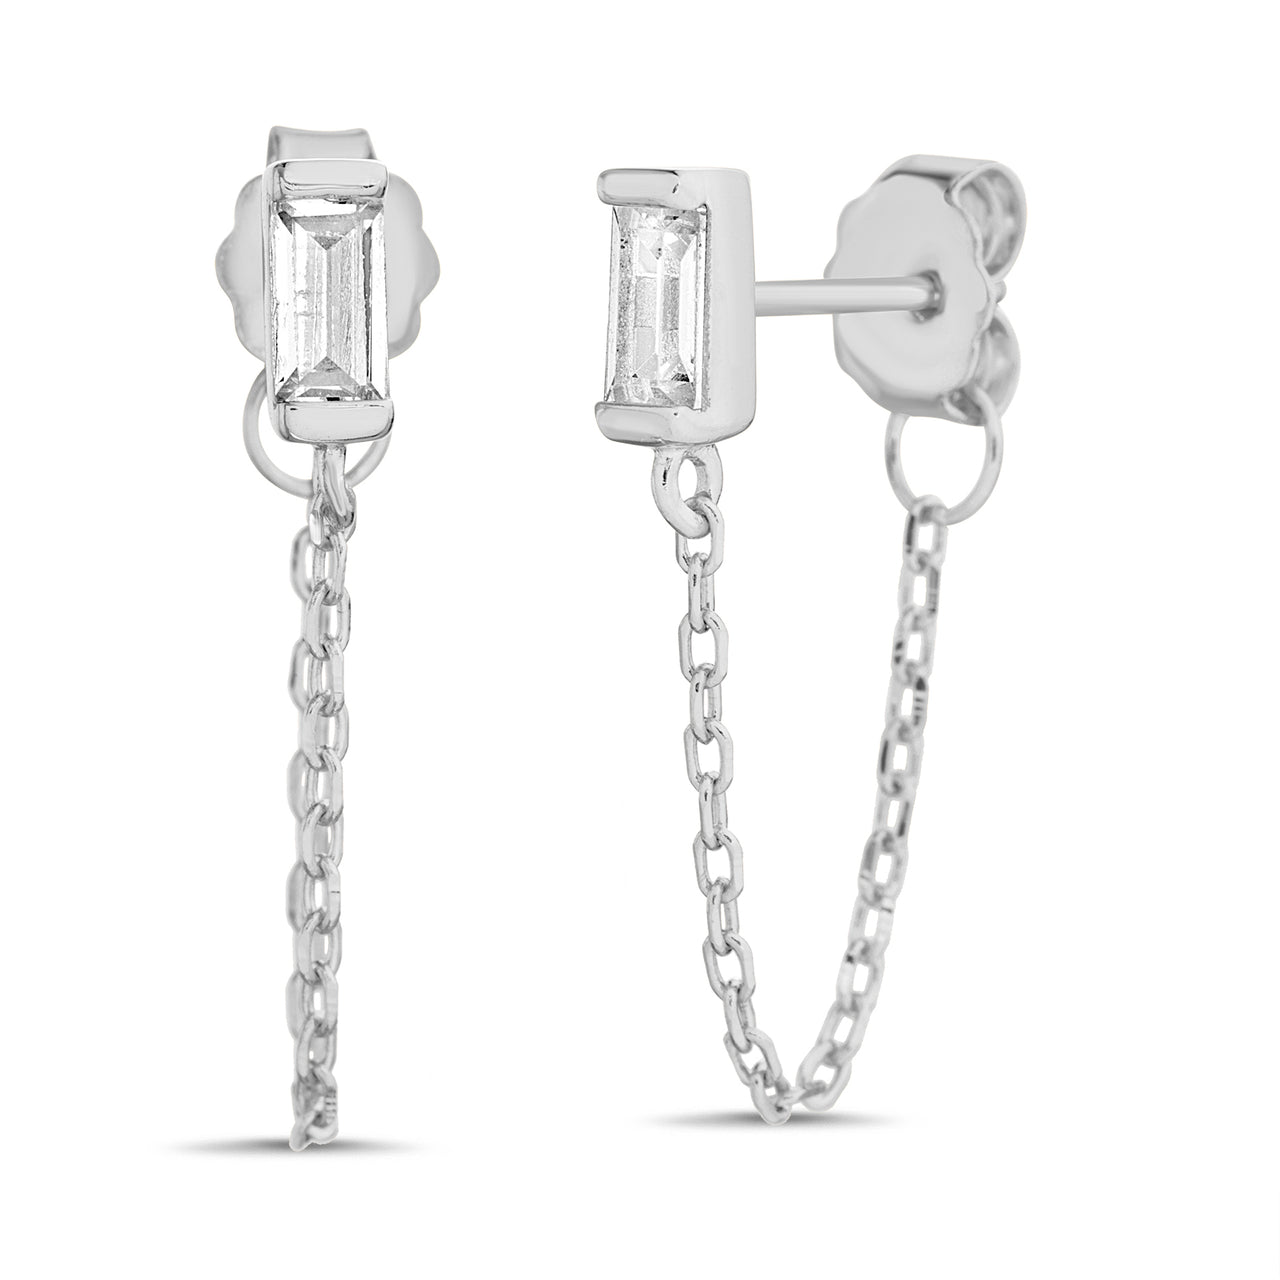 Lesa Michele Baguette Cut Cubic Zirconia Post Chain Front to Back Earrings in Rhodium Plated Sterling Silver